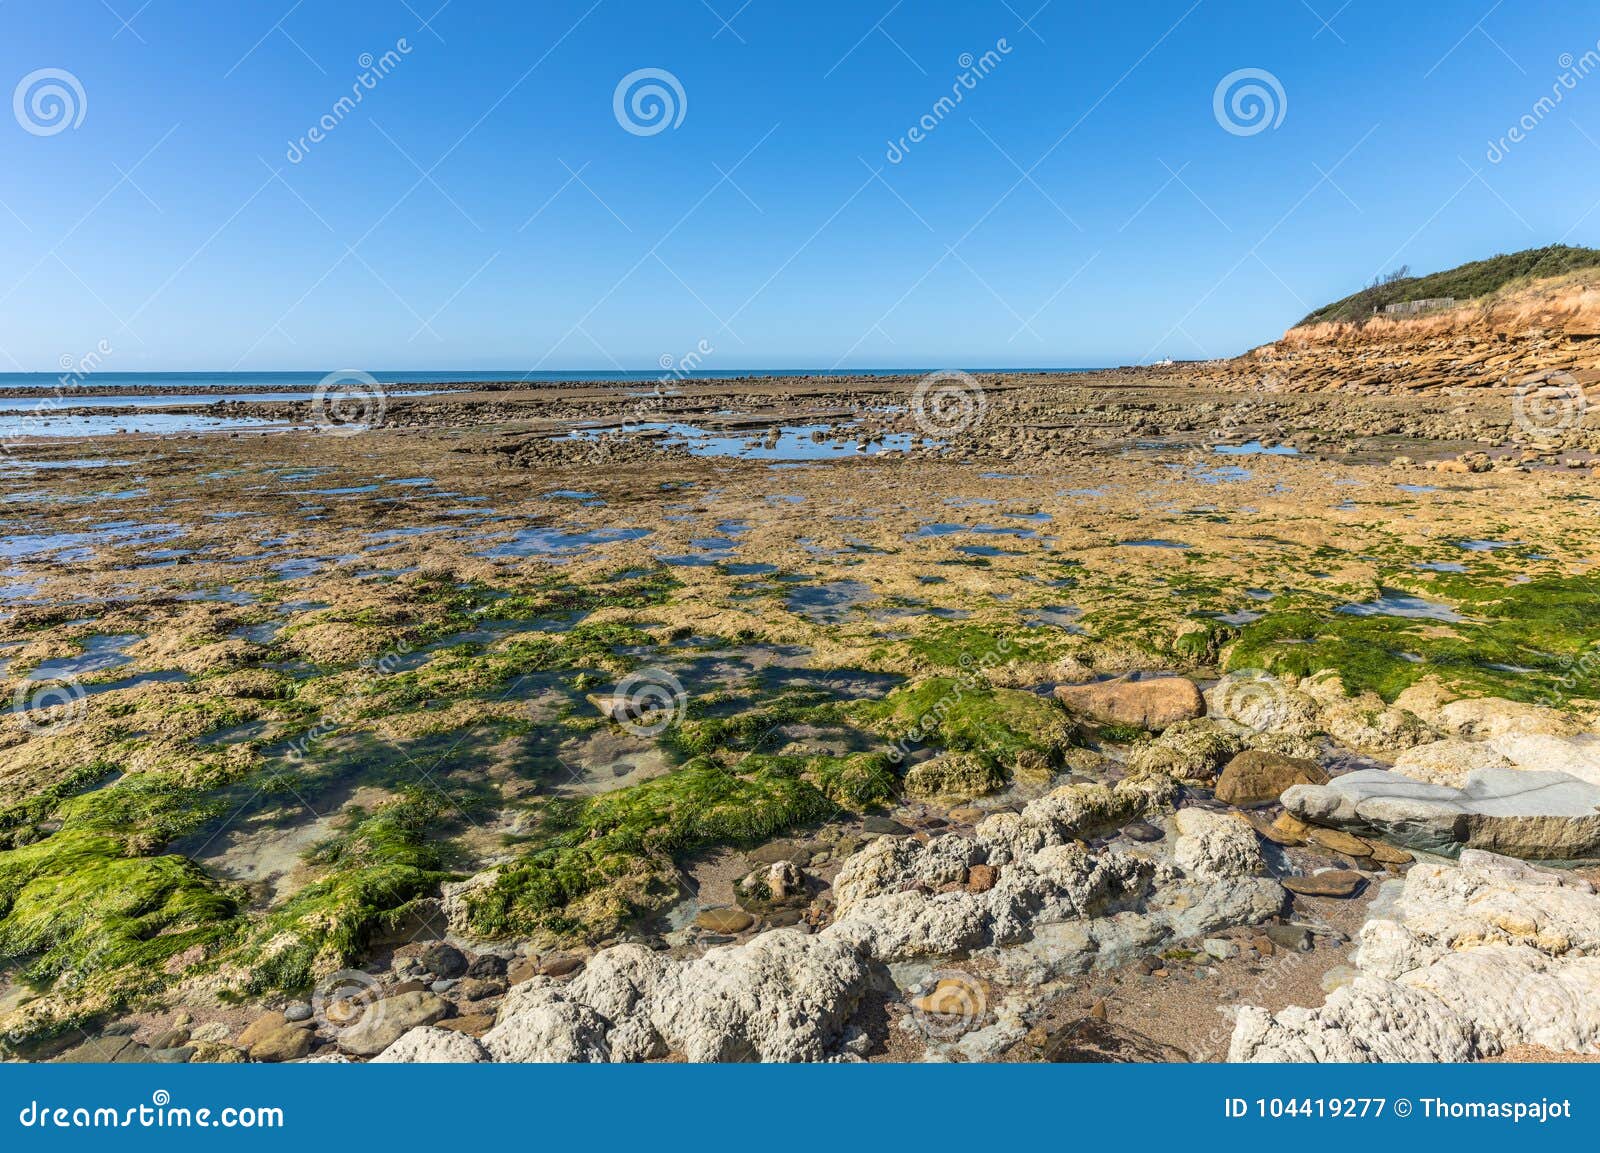 foreshore in west french coast